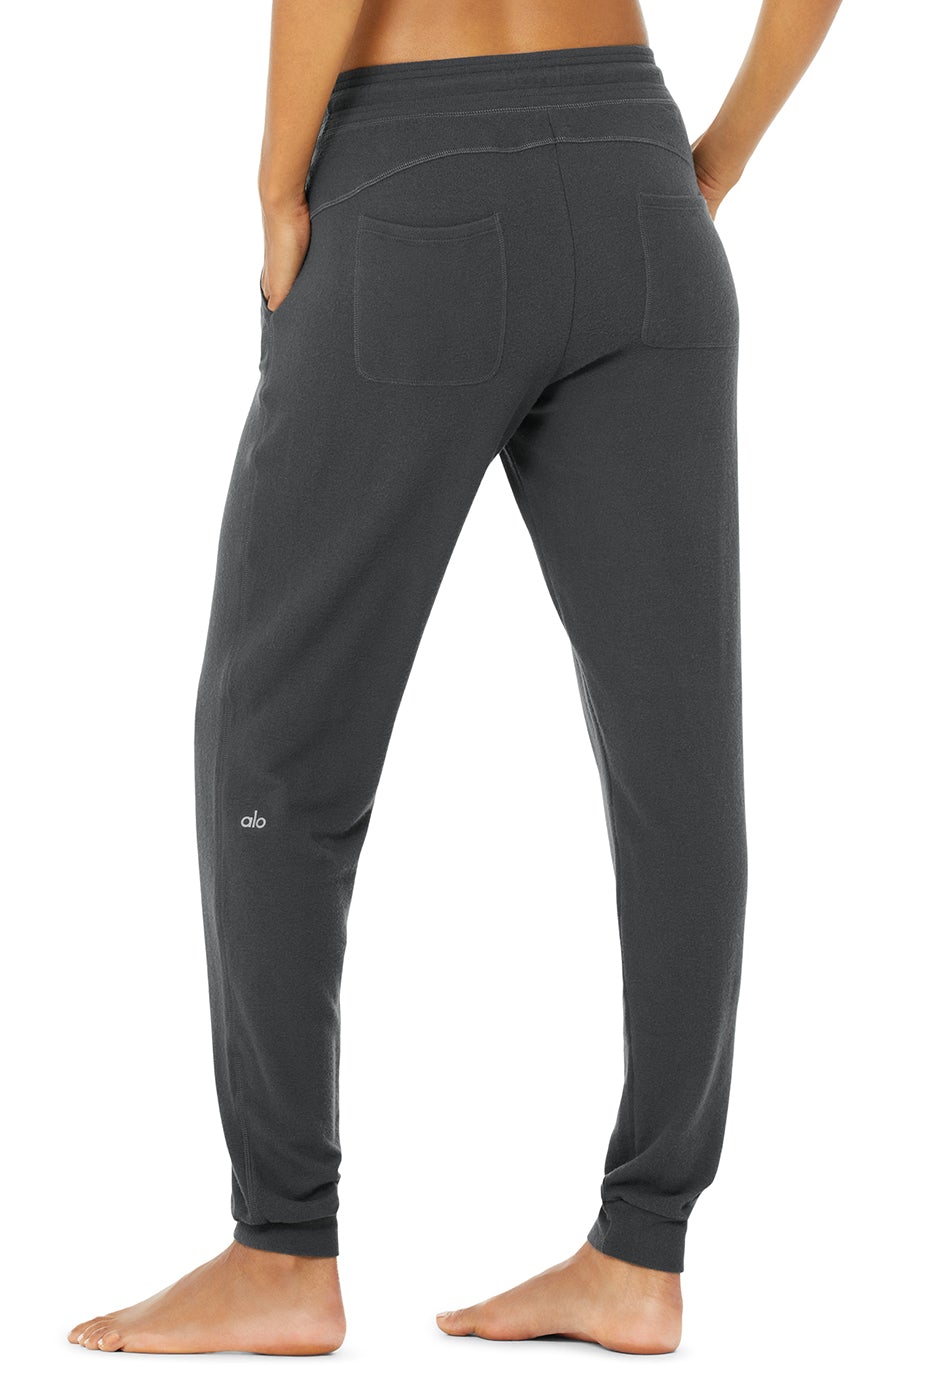 ALO Yoga Women's Soho Jogger Sweatpant in Anthracite (Charcoal